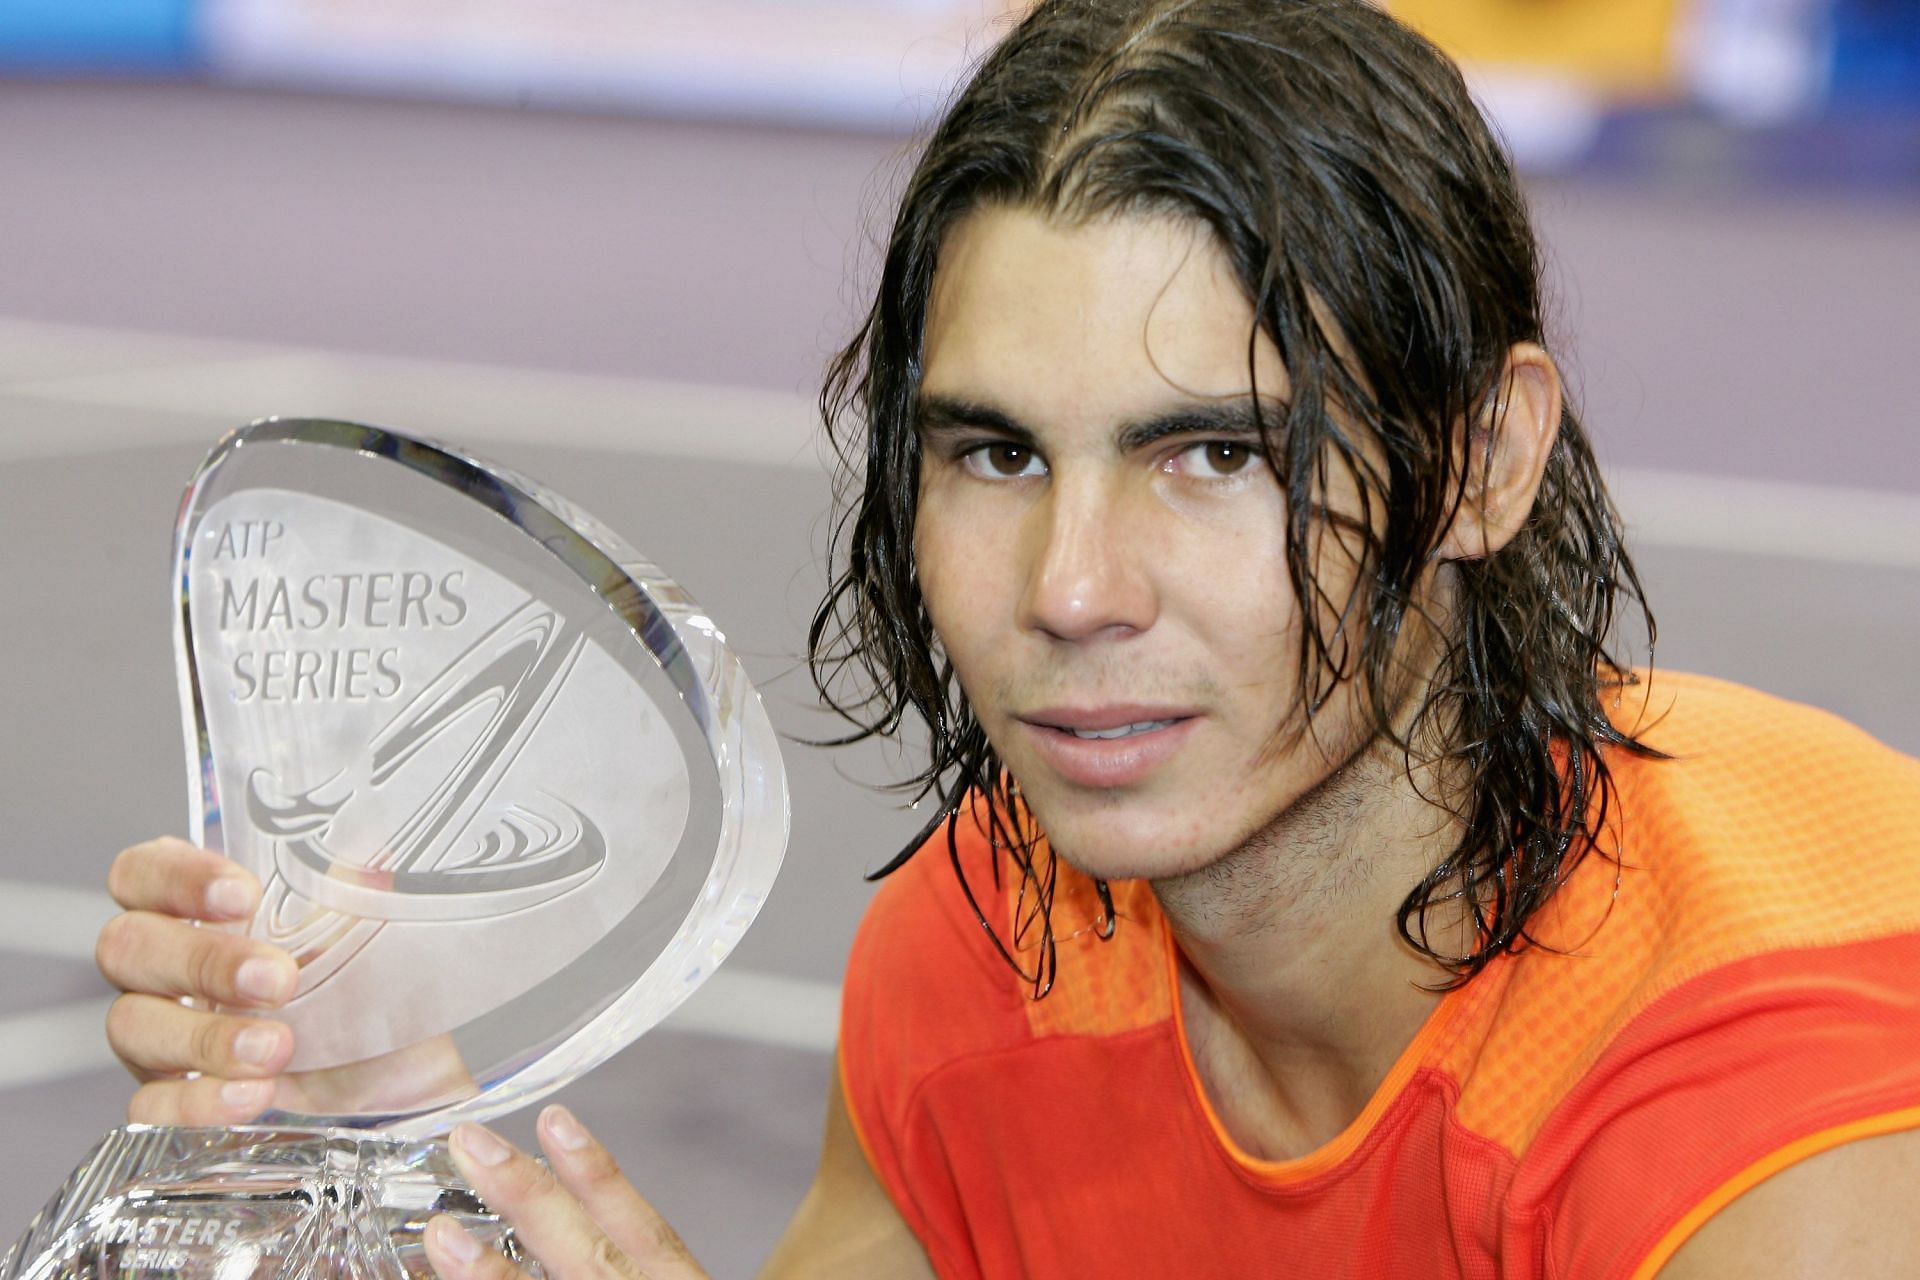 Rafael Nadal is one of the youngest winners of the Madrid Masters